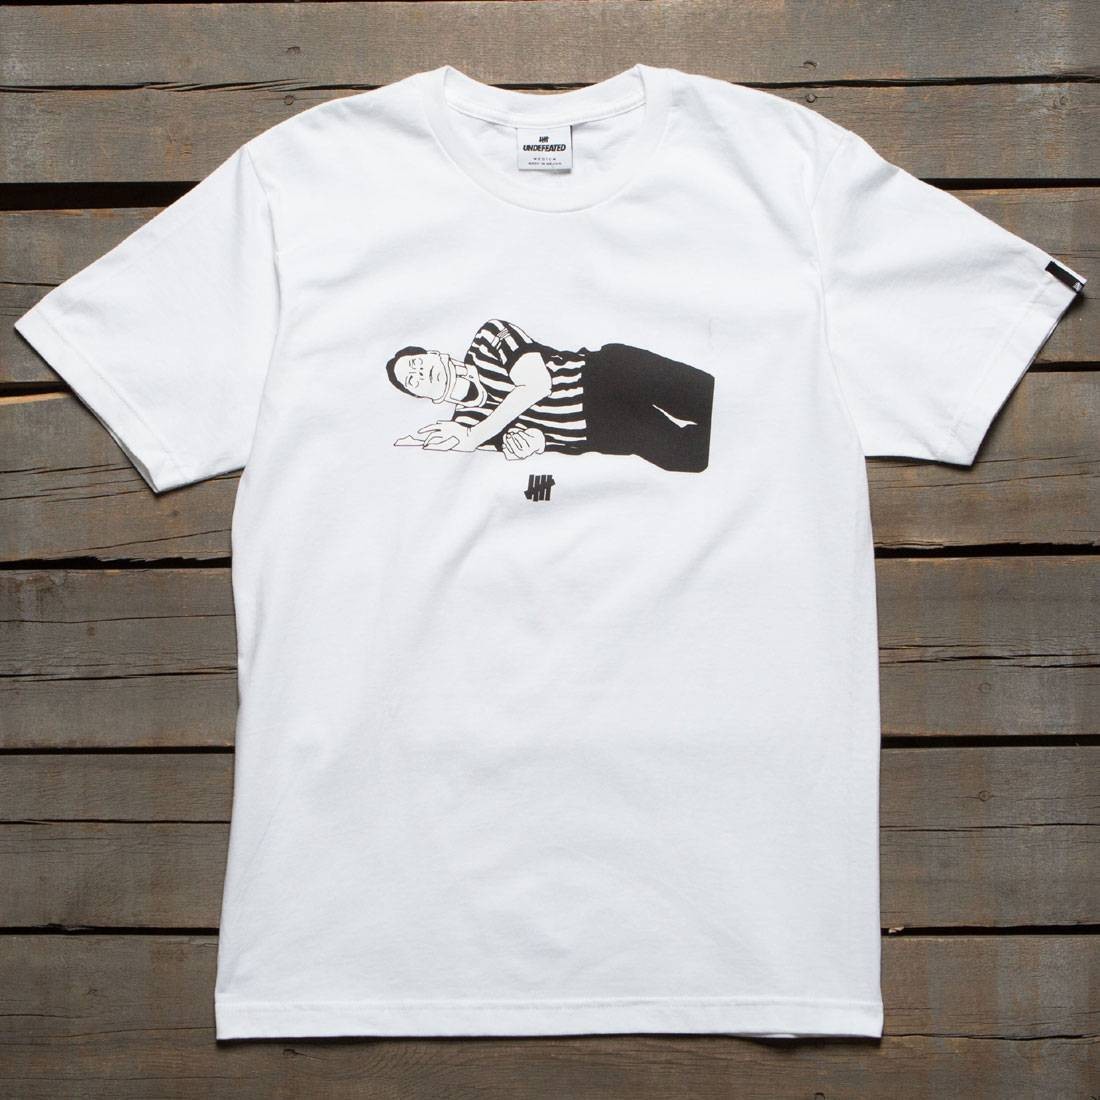 Undefeated Men Refed Tee white